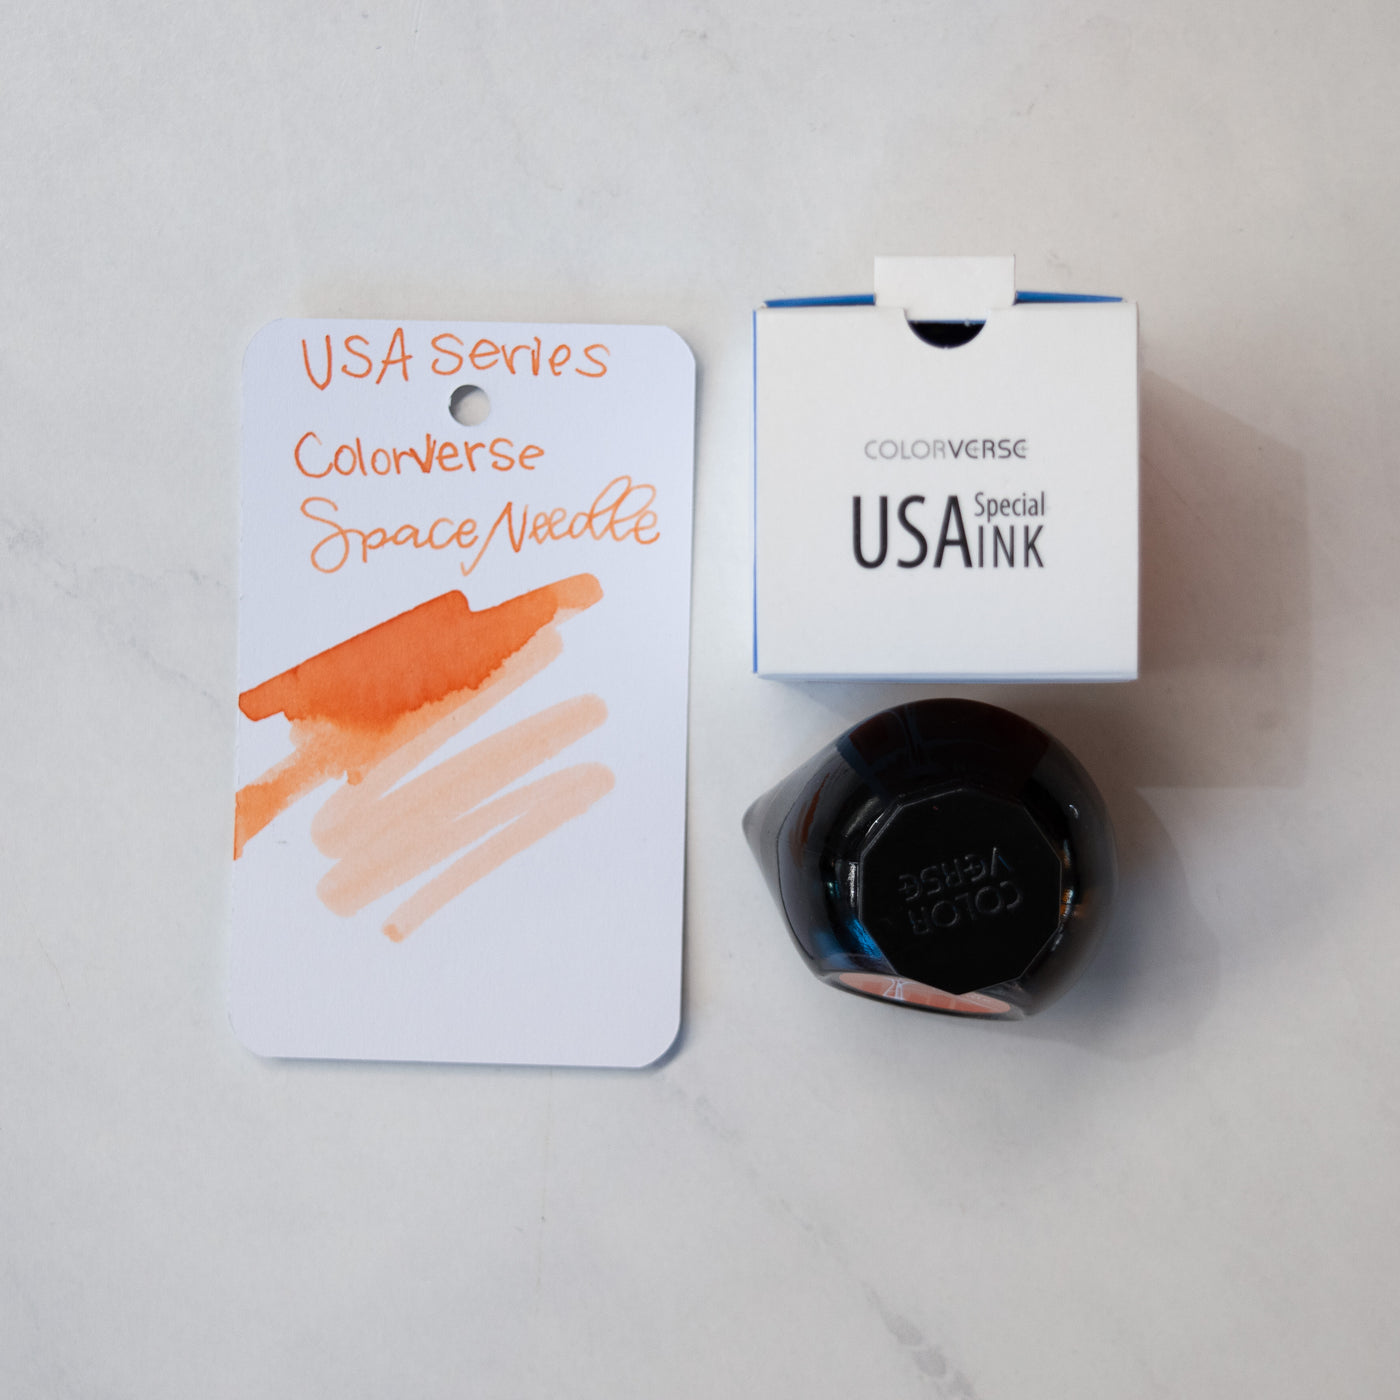 Colorverse USA Special Series Space Needle Ink Bottle orange